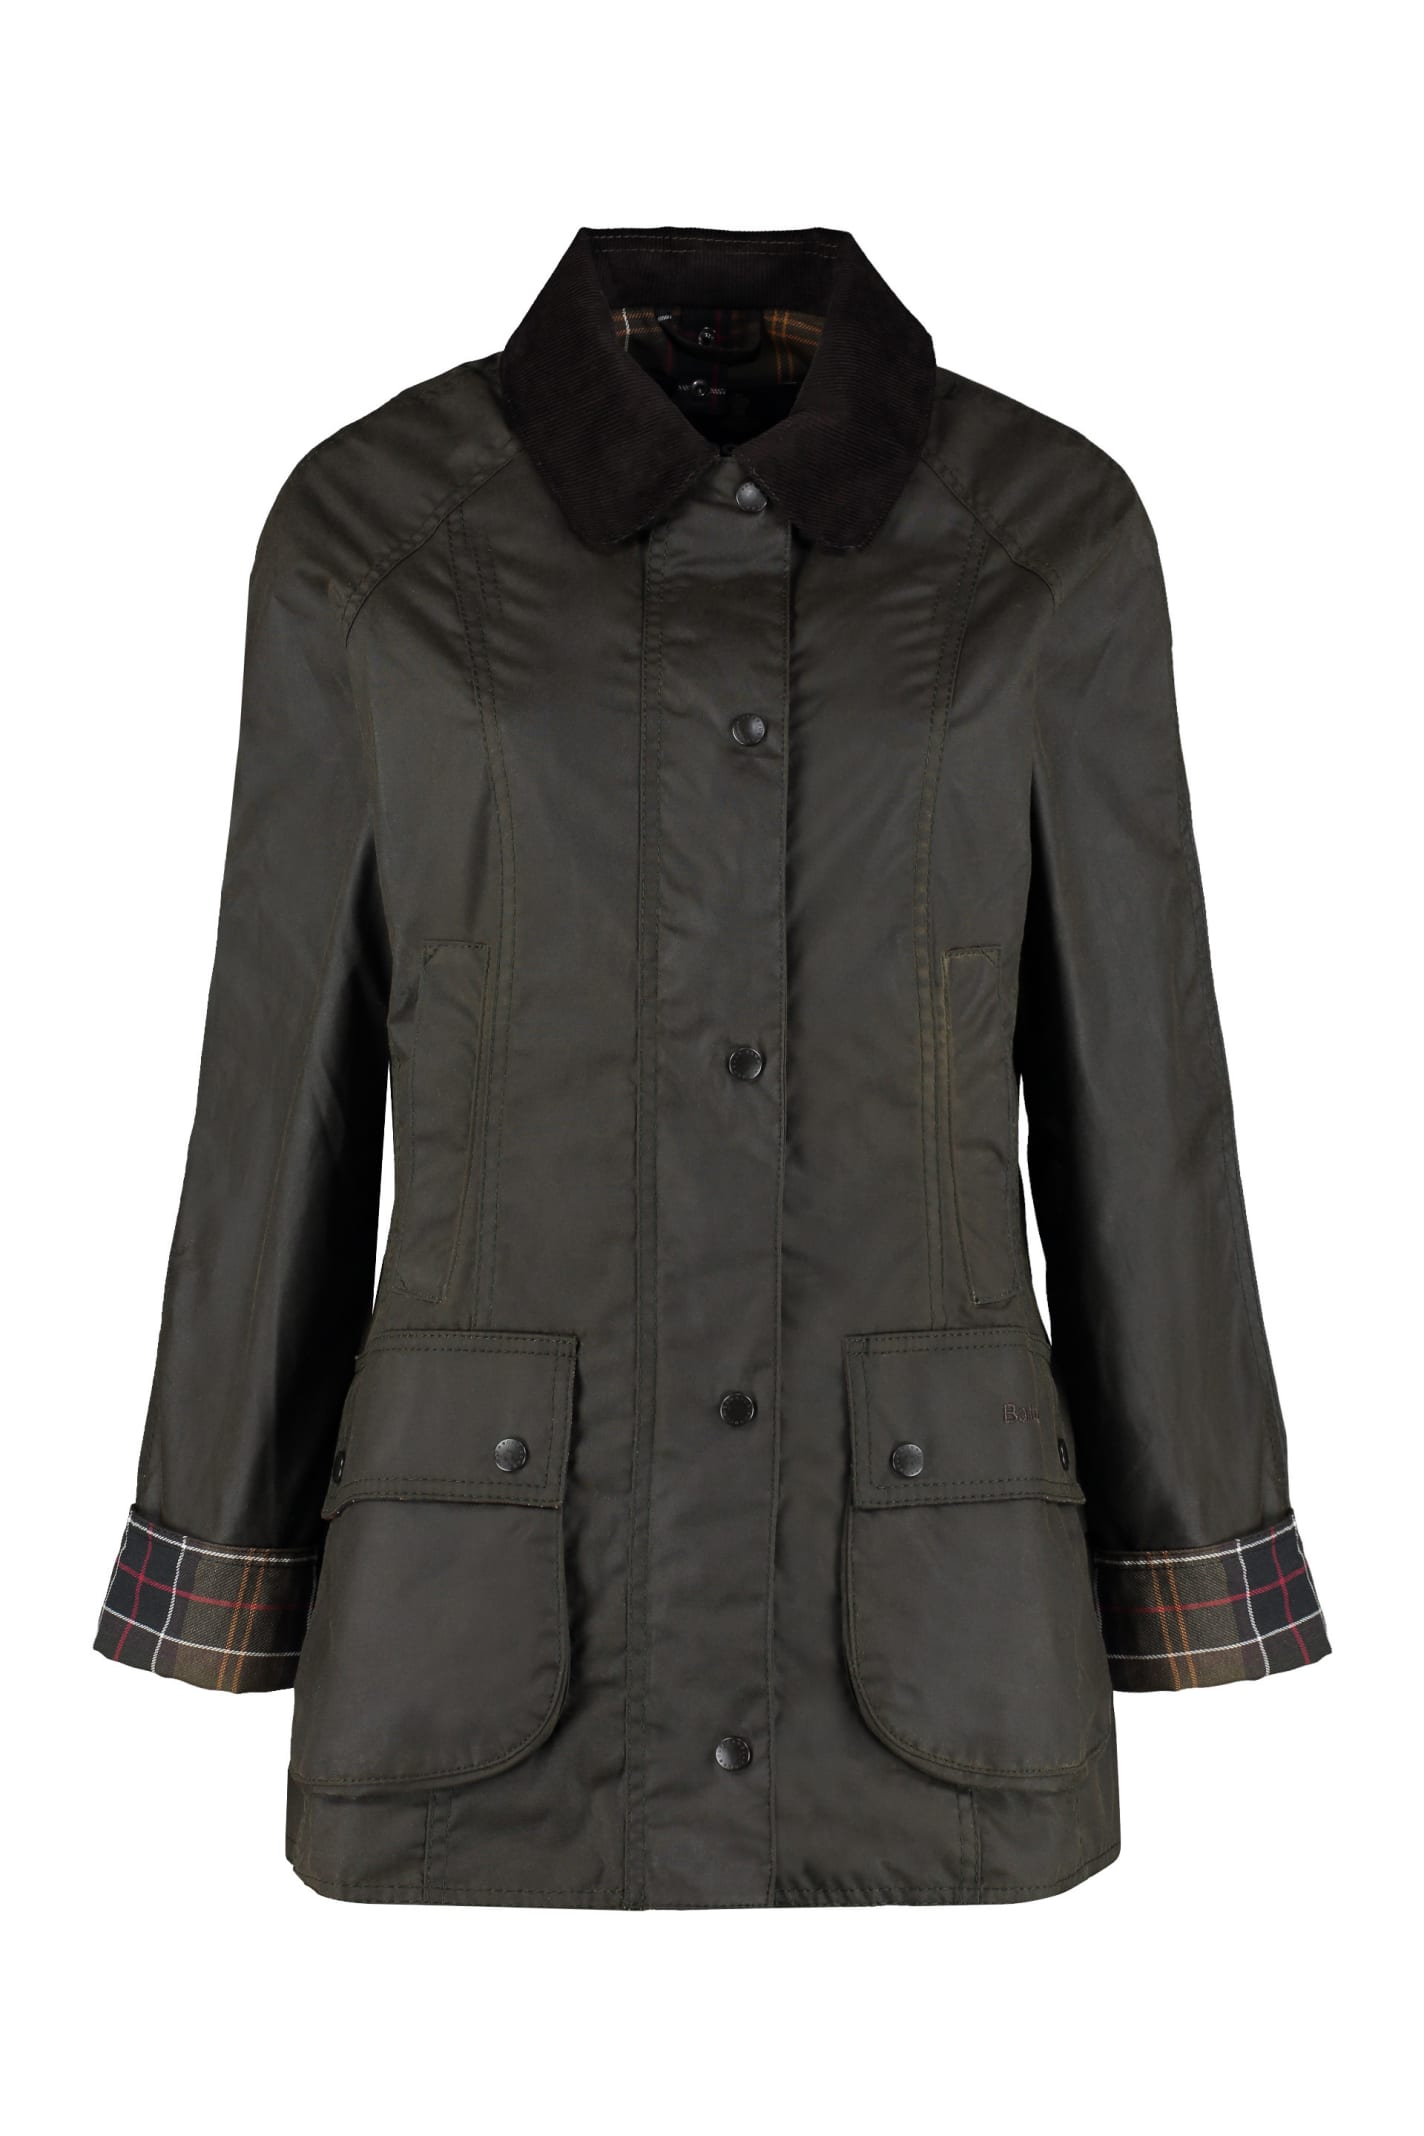 Barbour Long Buttoned Jacket